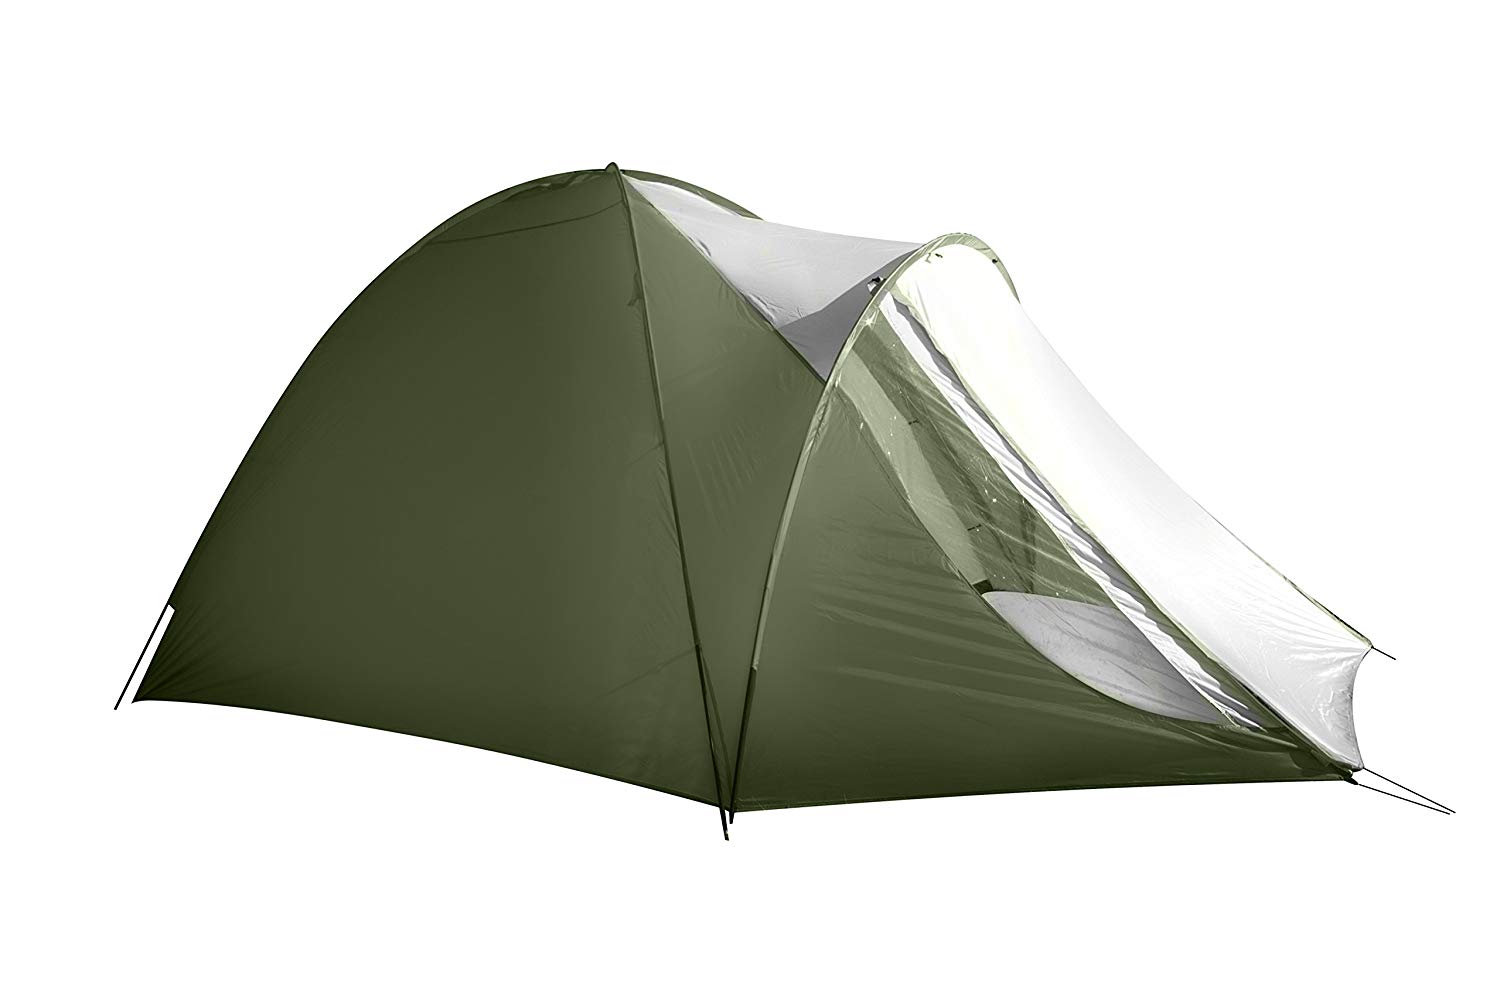 3OWL Everglades 5 Person Easy Setup Hiking， Camping， Outdoors Backpacking Green Tent